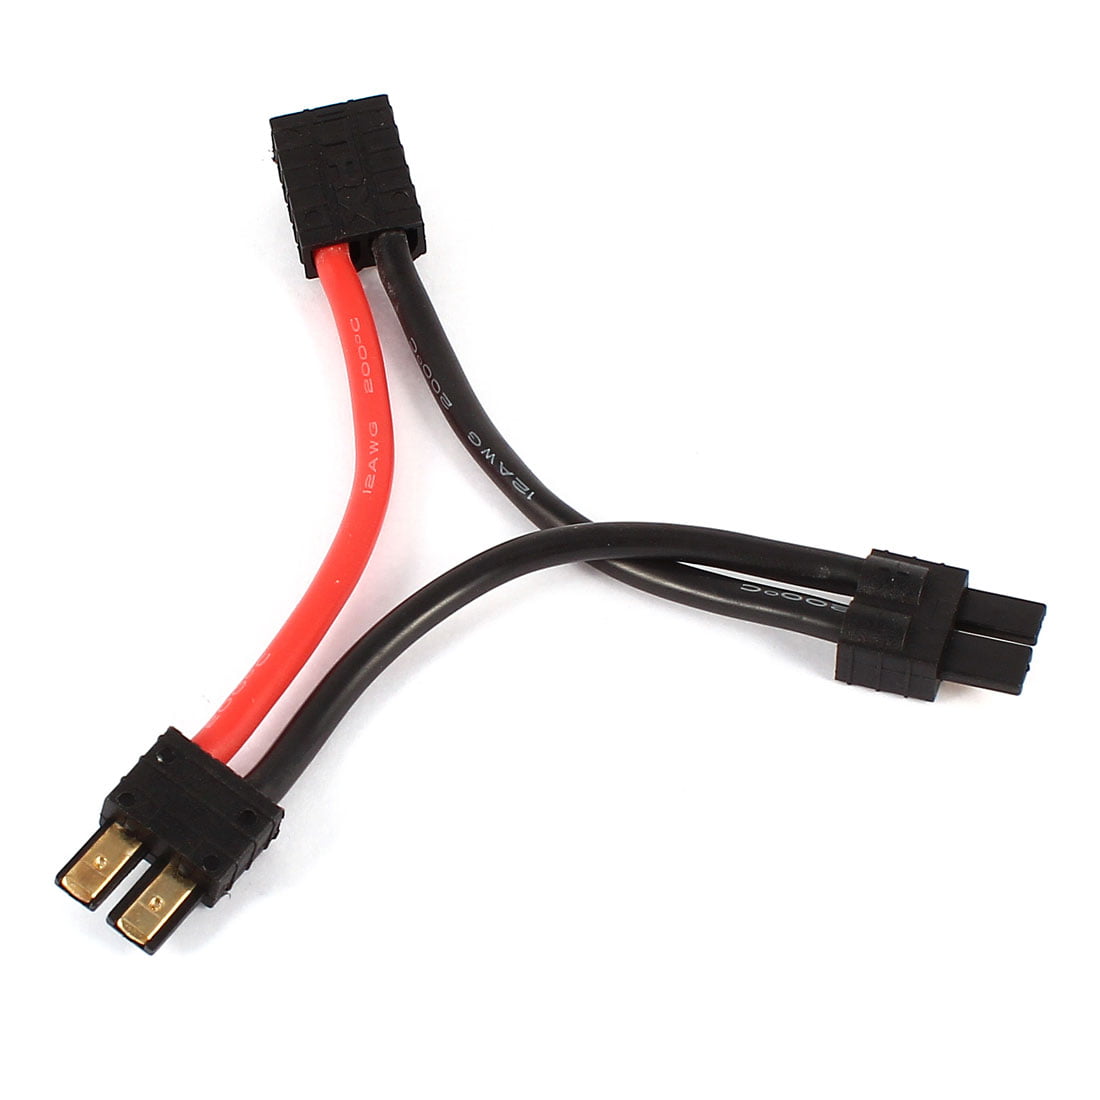 Traxxas TRX Series Harness Lipo Battery Adapter Cable Connector Plug 10 AWG Wire 